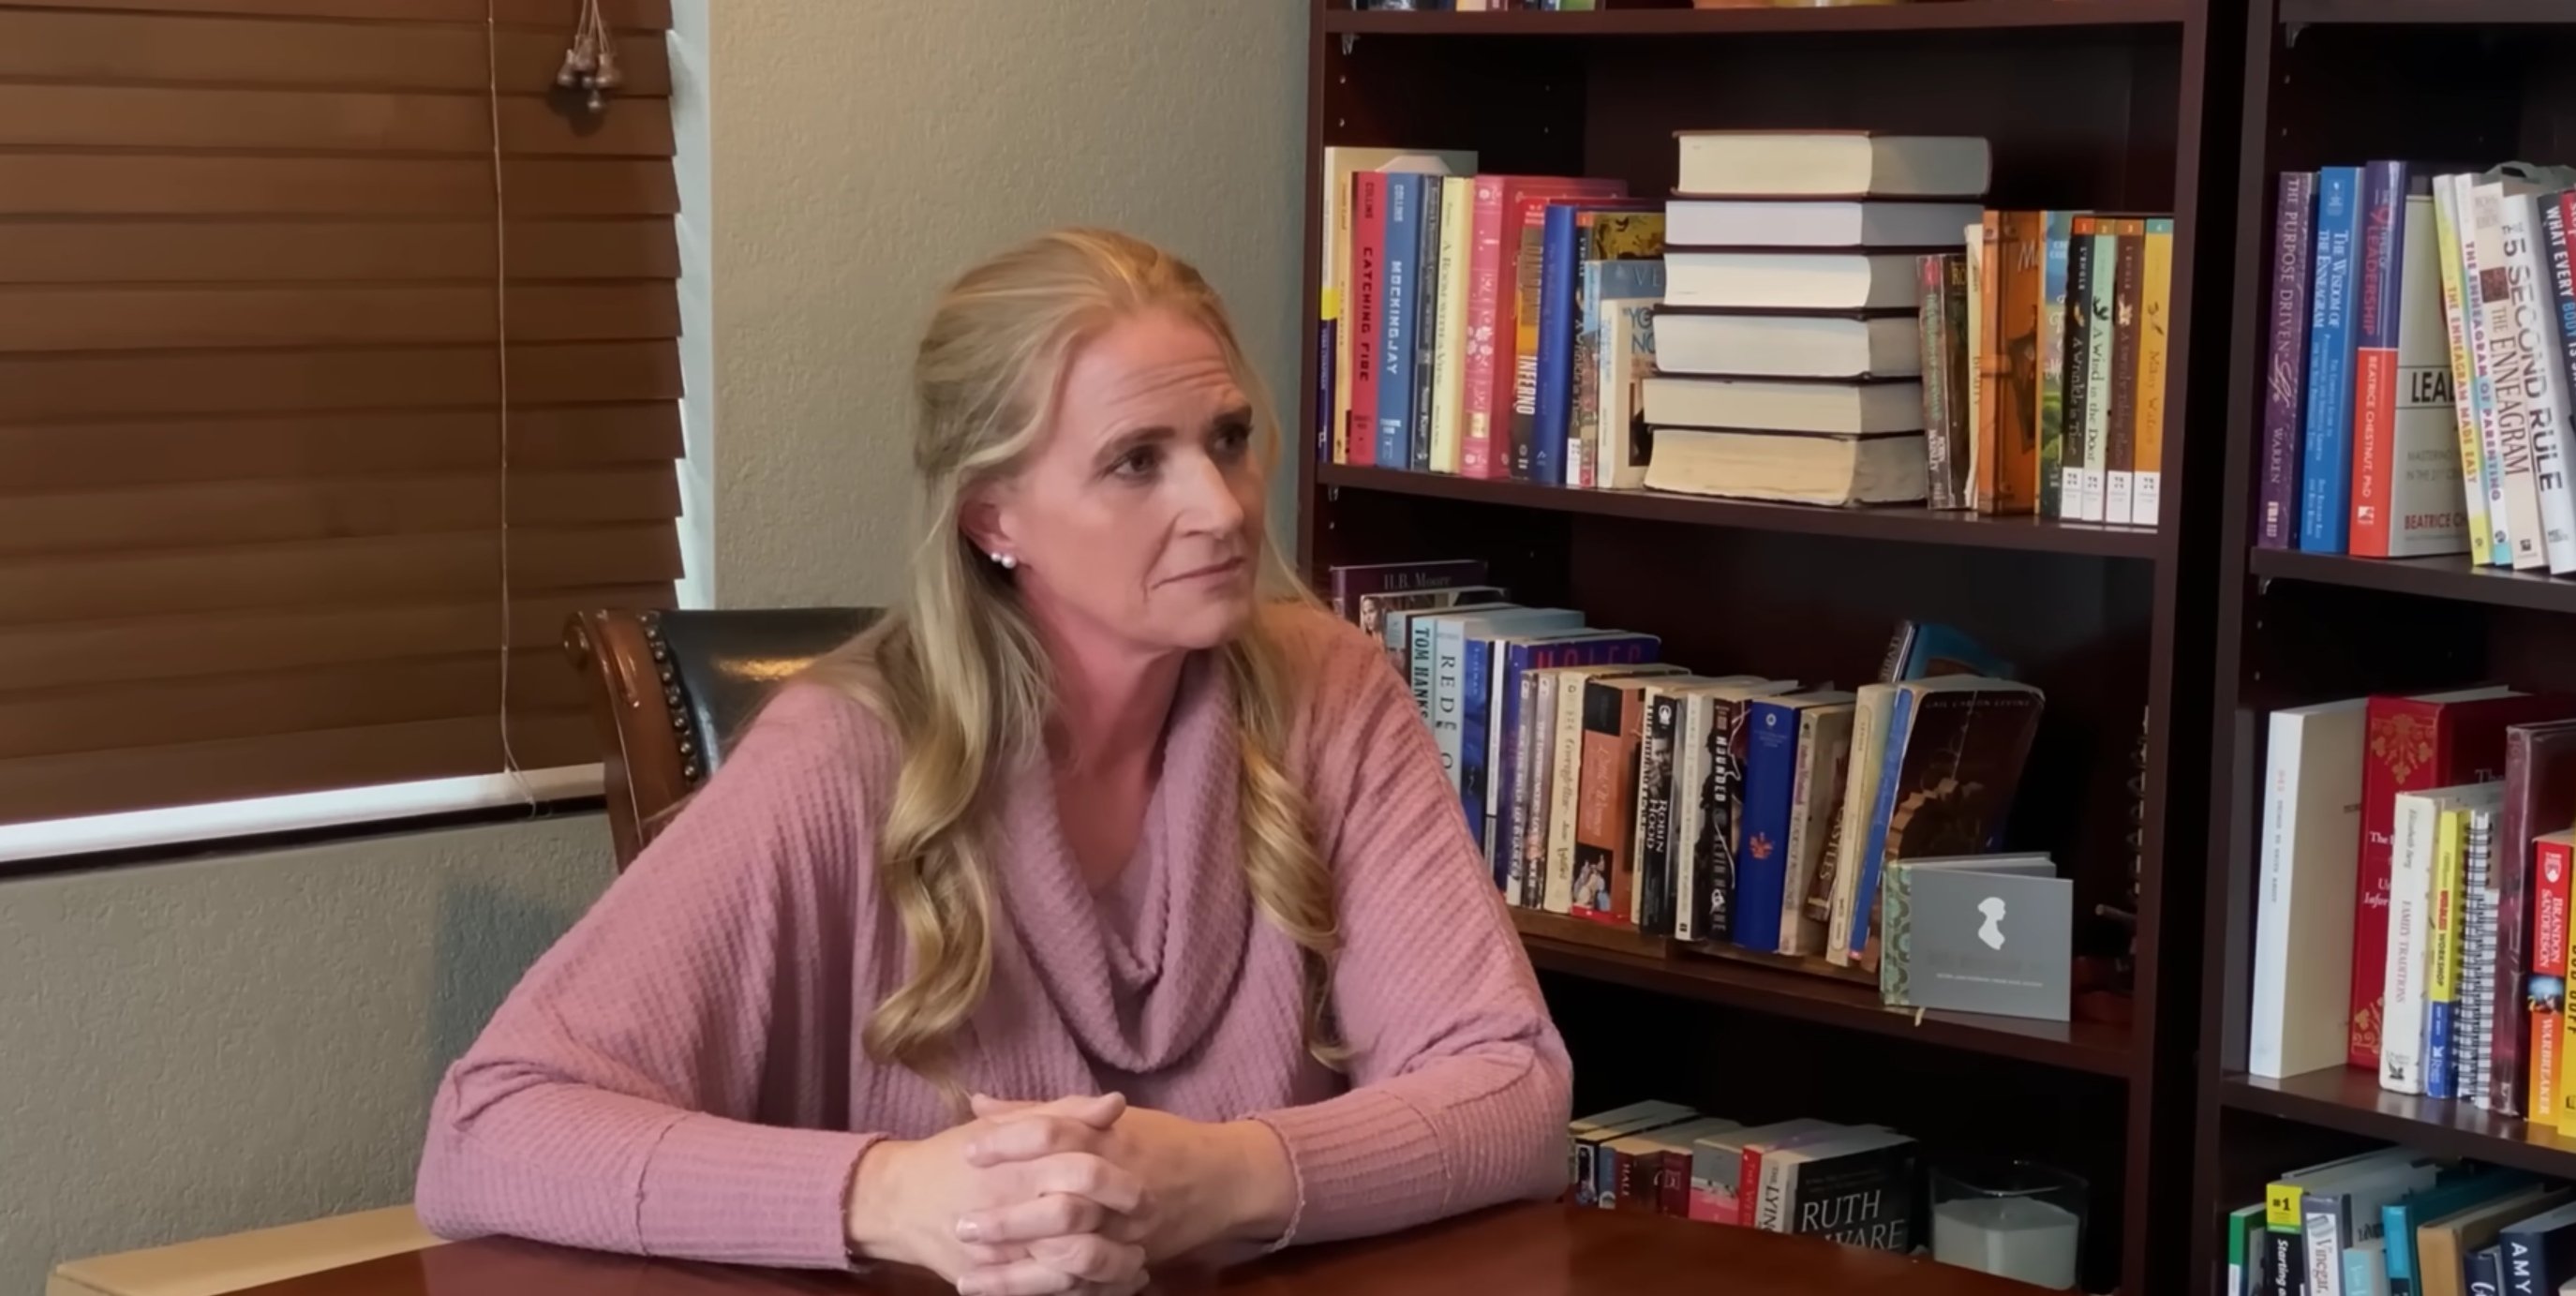 Christine Brown sits in front of her bookshelf in her office on 'Sister Wives' Season 17 on TLC.